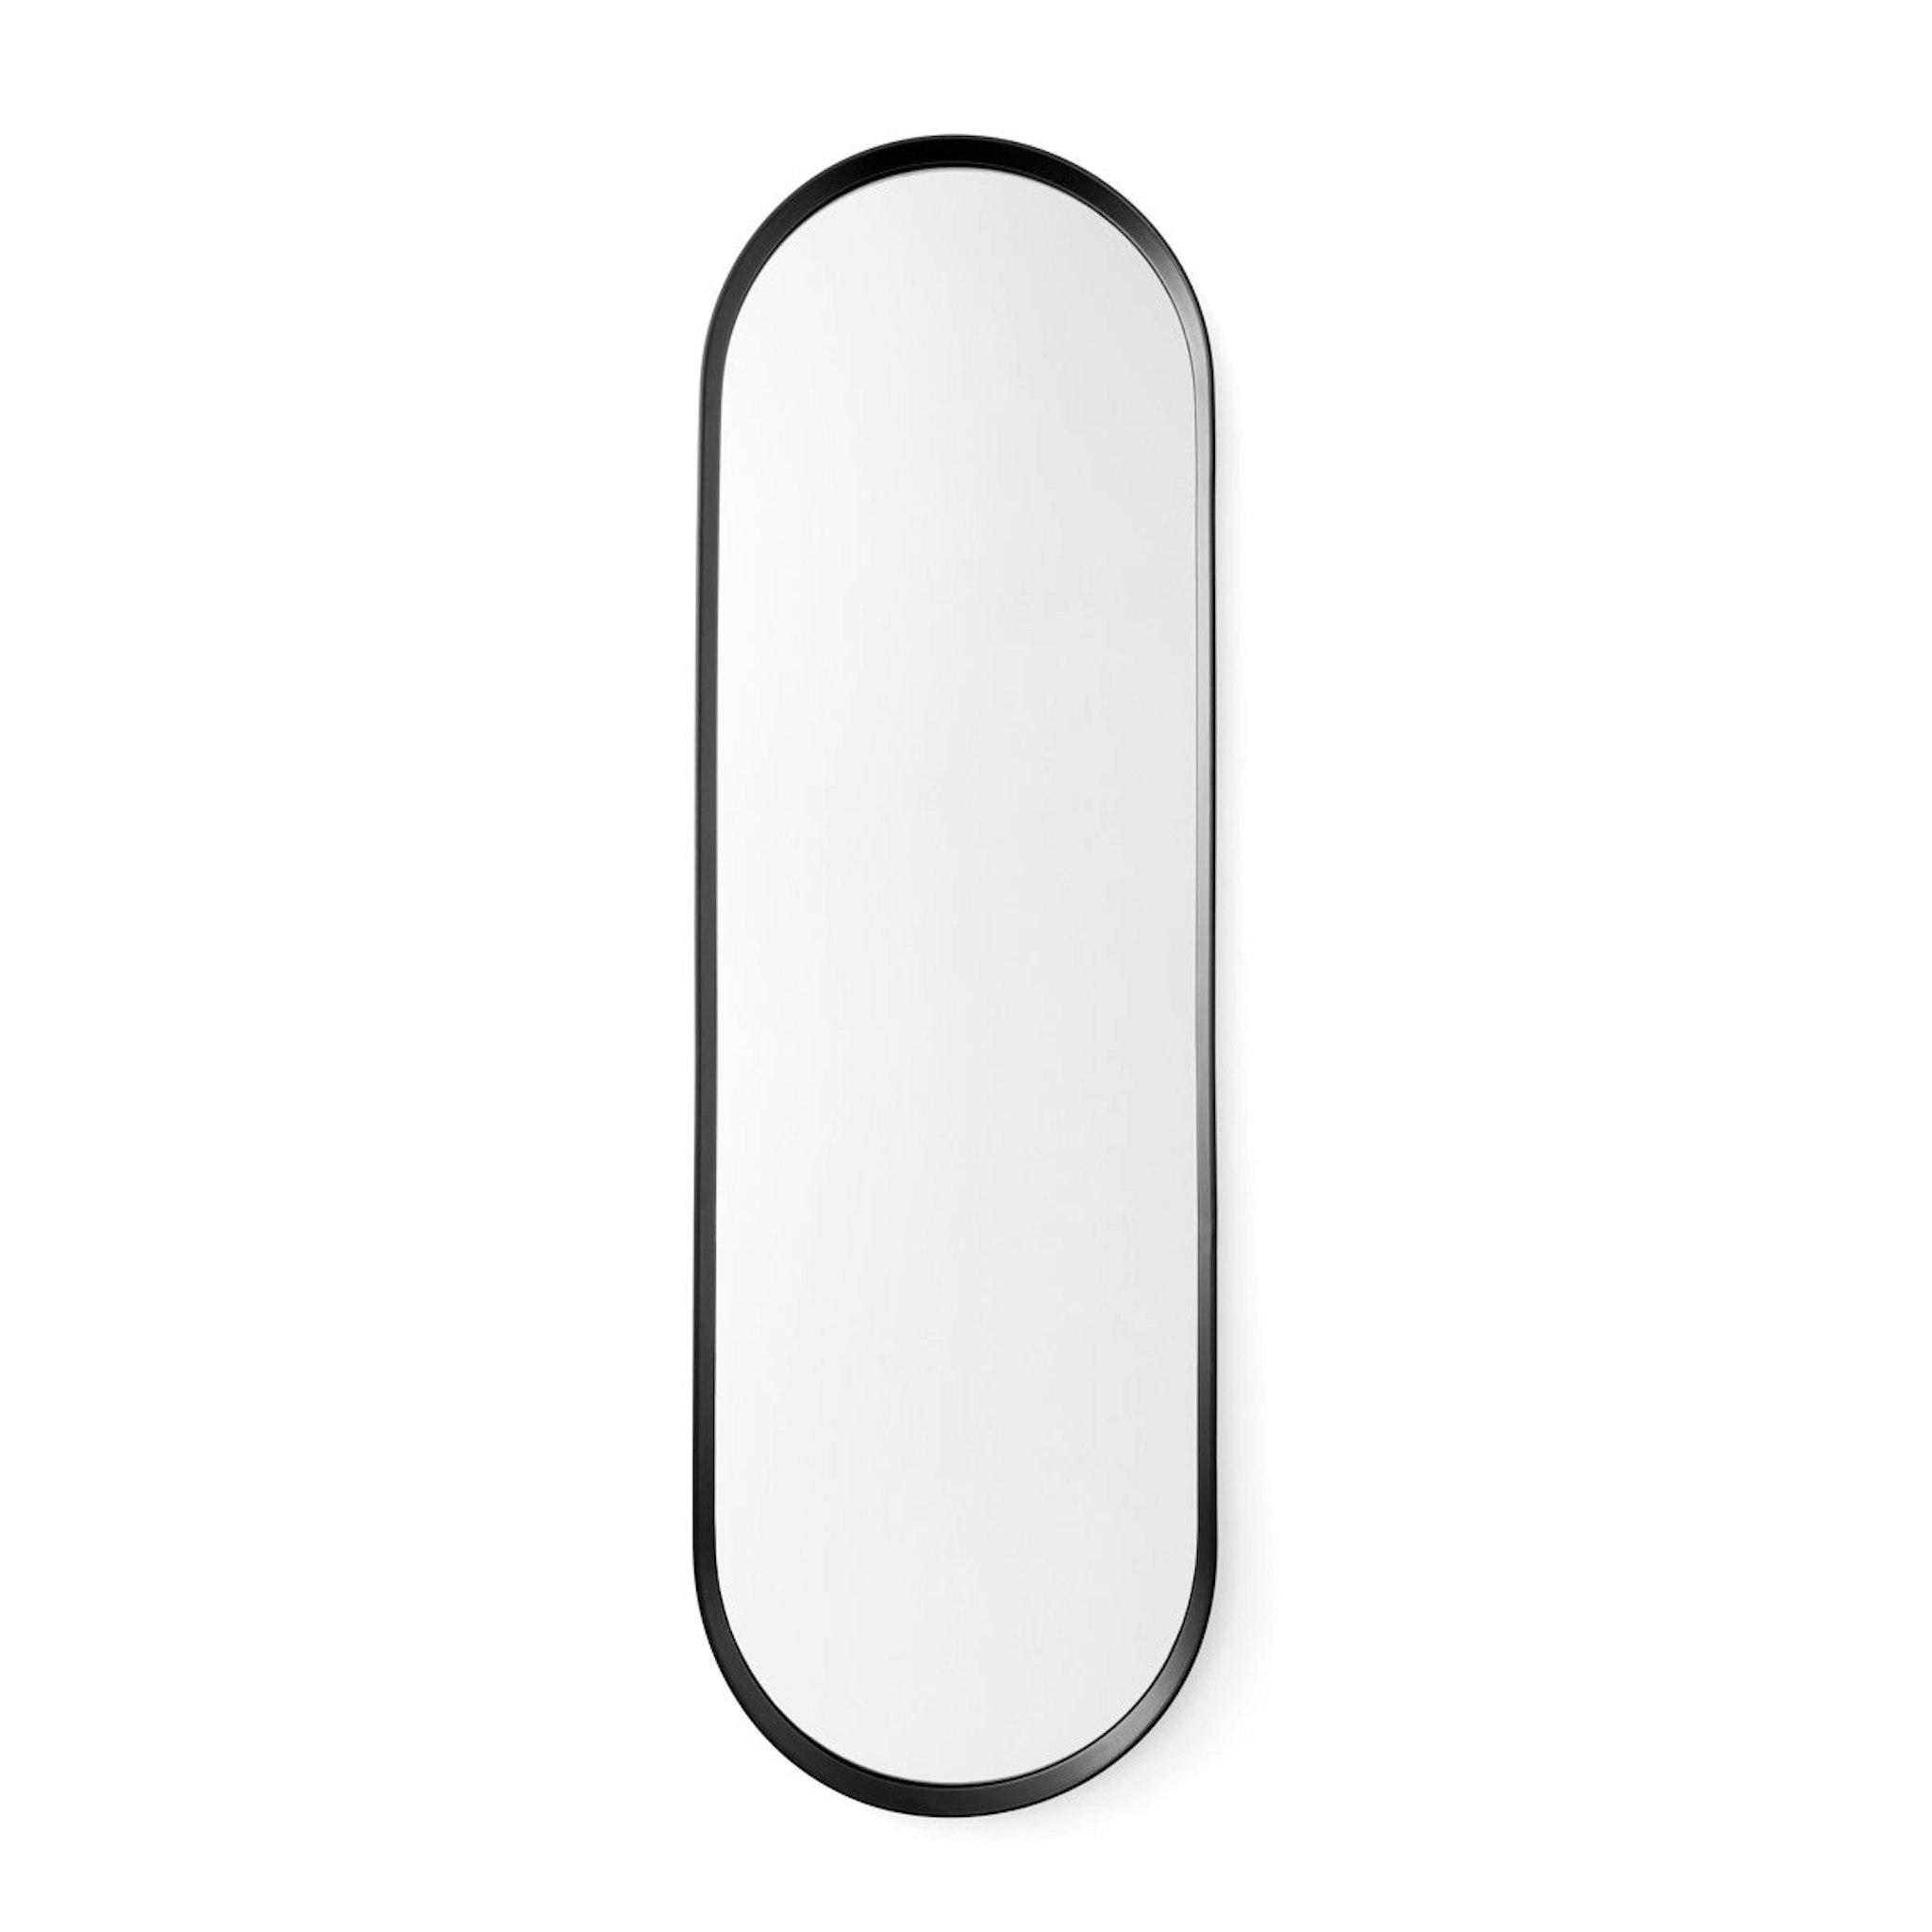 Norm Oval Wall Mirror by Menu